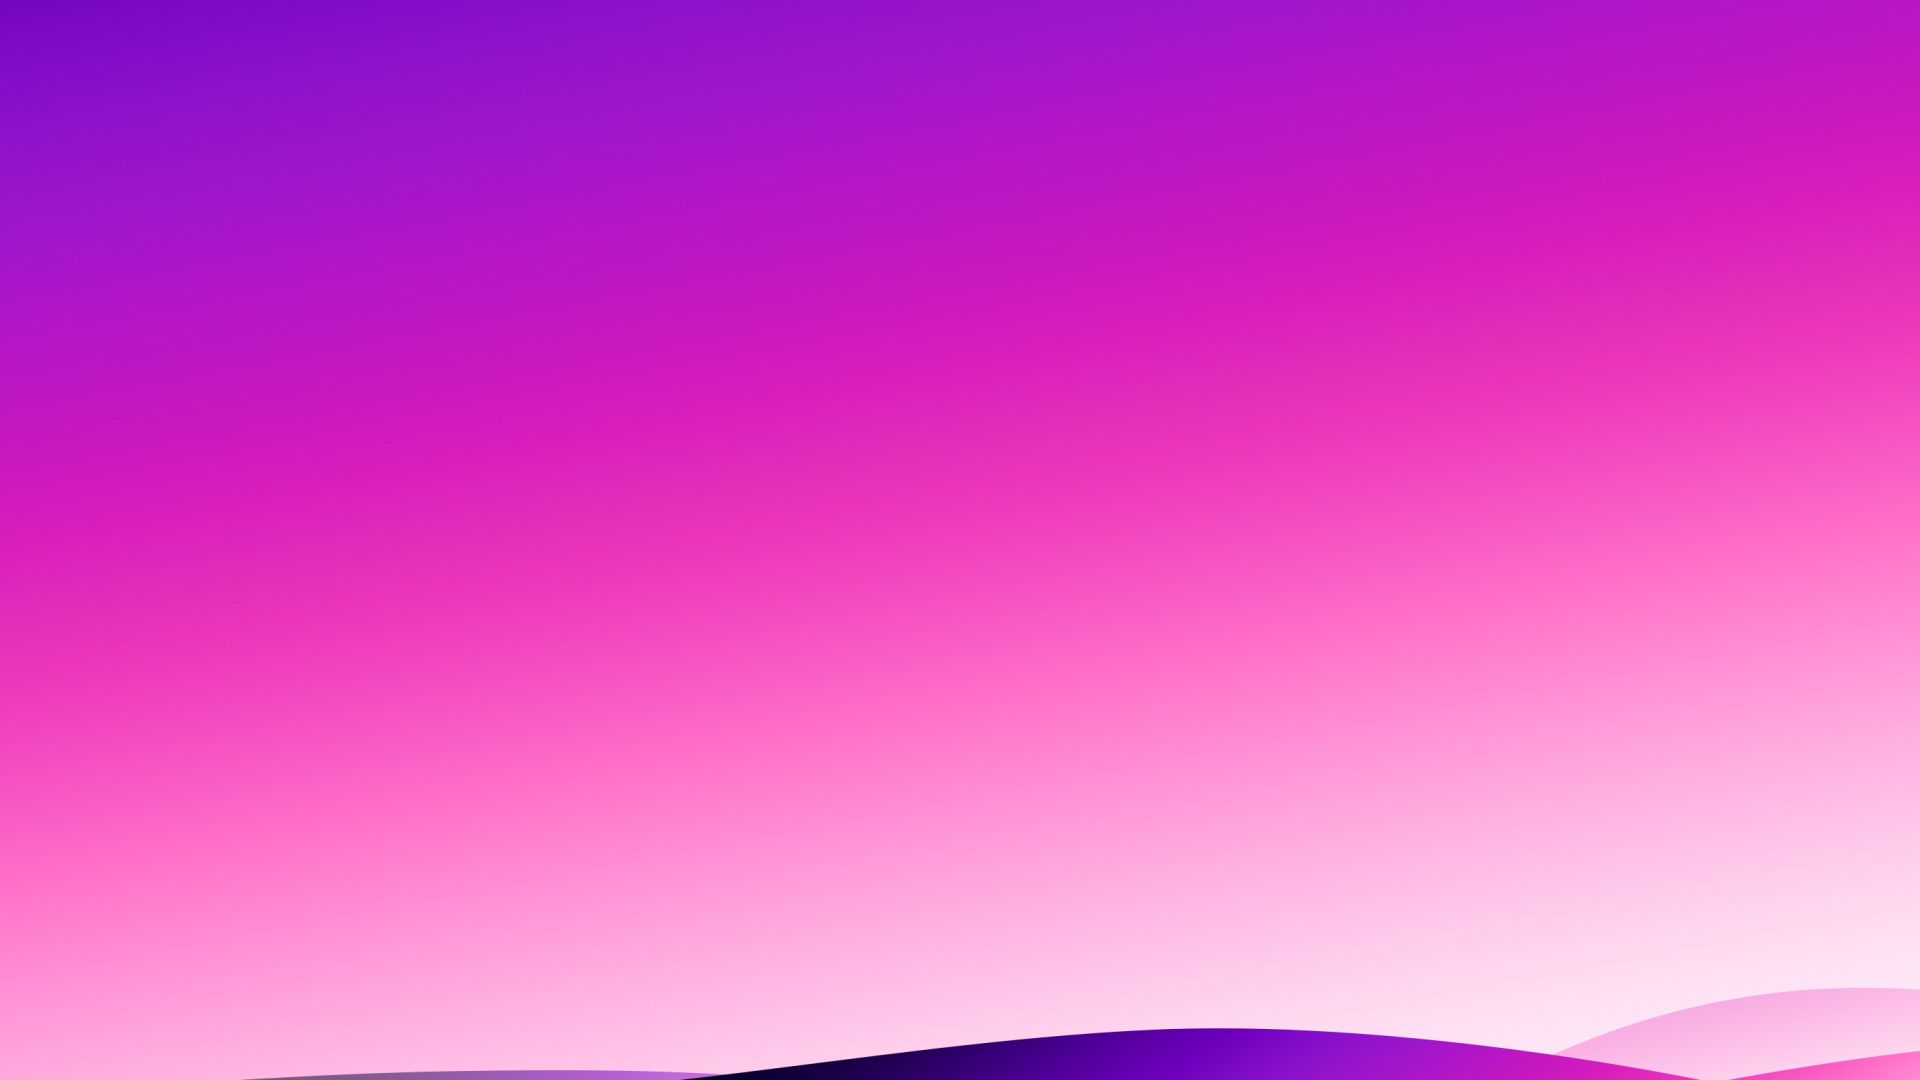 Gradient iPhone 8 Wallpaper with high-resolution 1080x1920 pixel. You can use this wallpaper for your iPhone 8, iPhone 8 Plus, iPhone X, XS, XS Max, XR, 11, 11 Pro, 11 Pro Max home screen, lock screen, Apple Watch, and iPad - Magenta